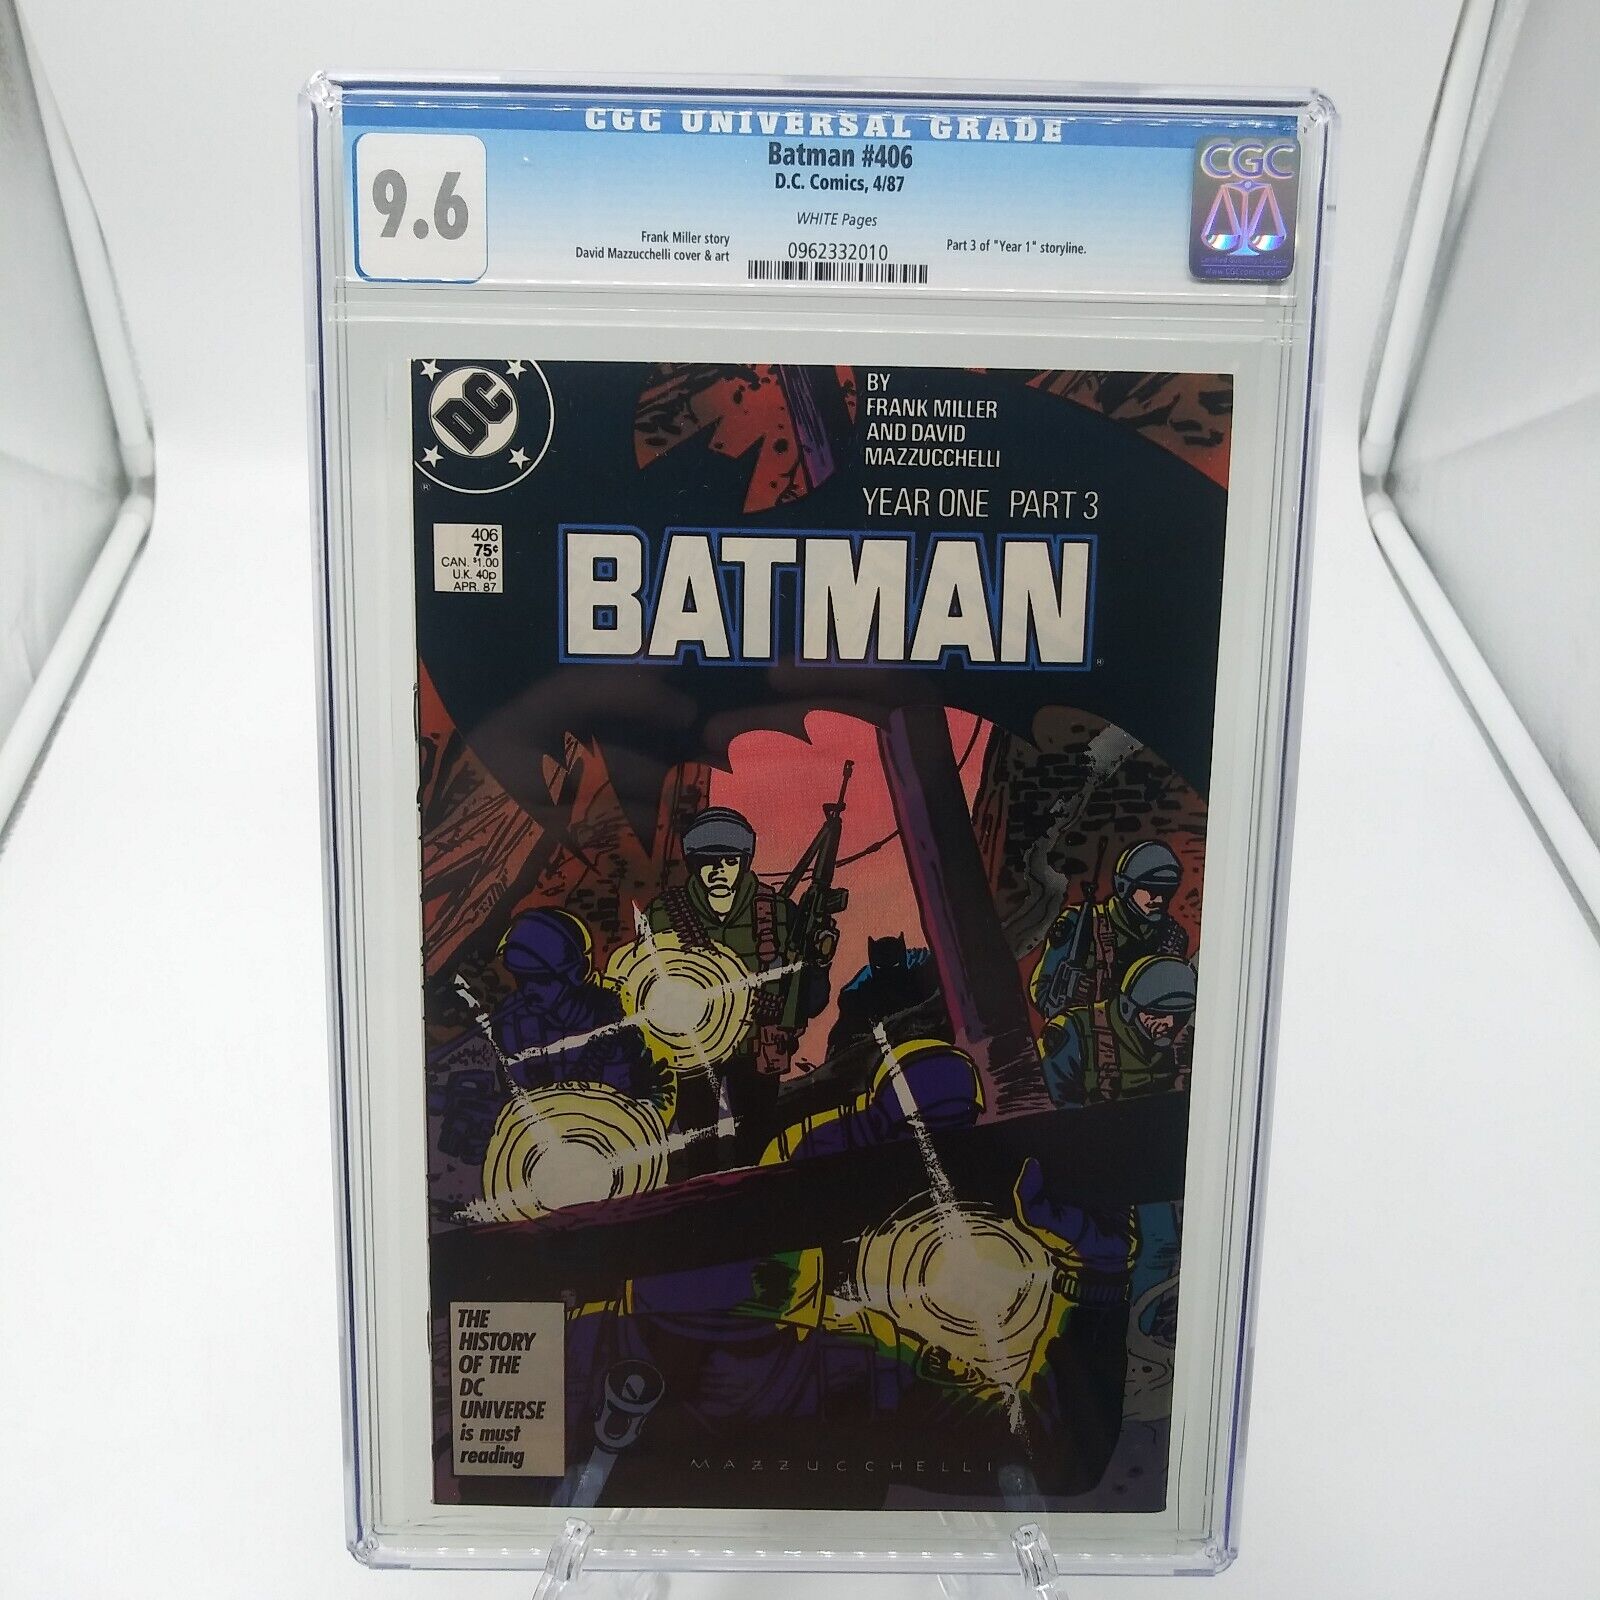 BATMAN #406 YEAR 1 PART 3 DC COMICS 1987 MILLER STORY CGC 9.6 GRADED White Pages